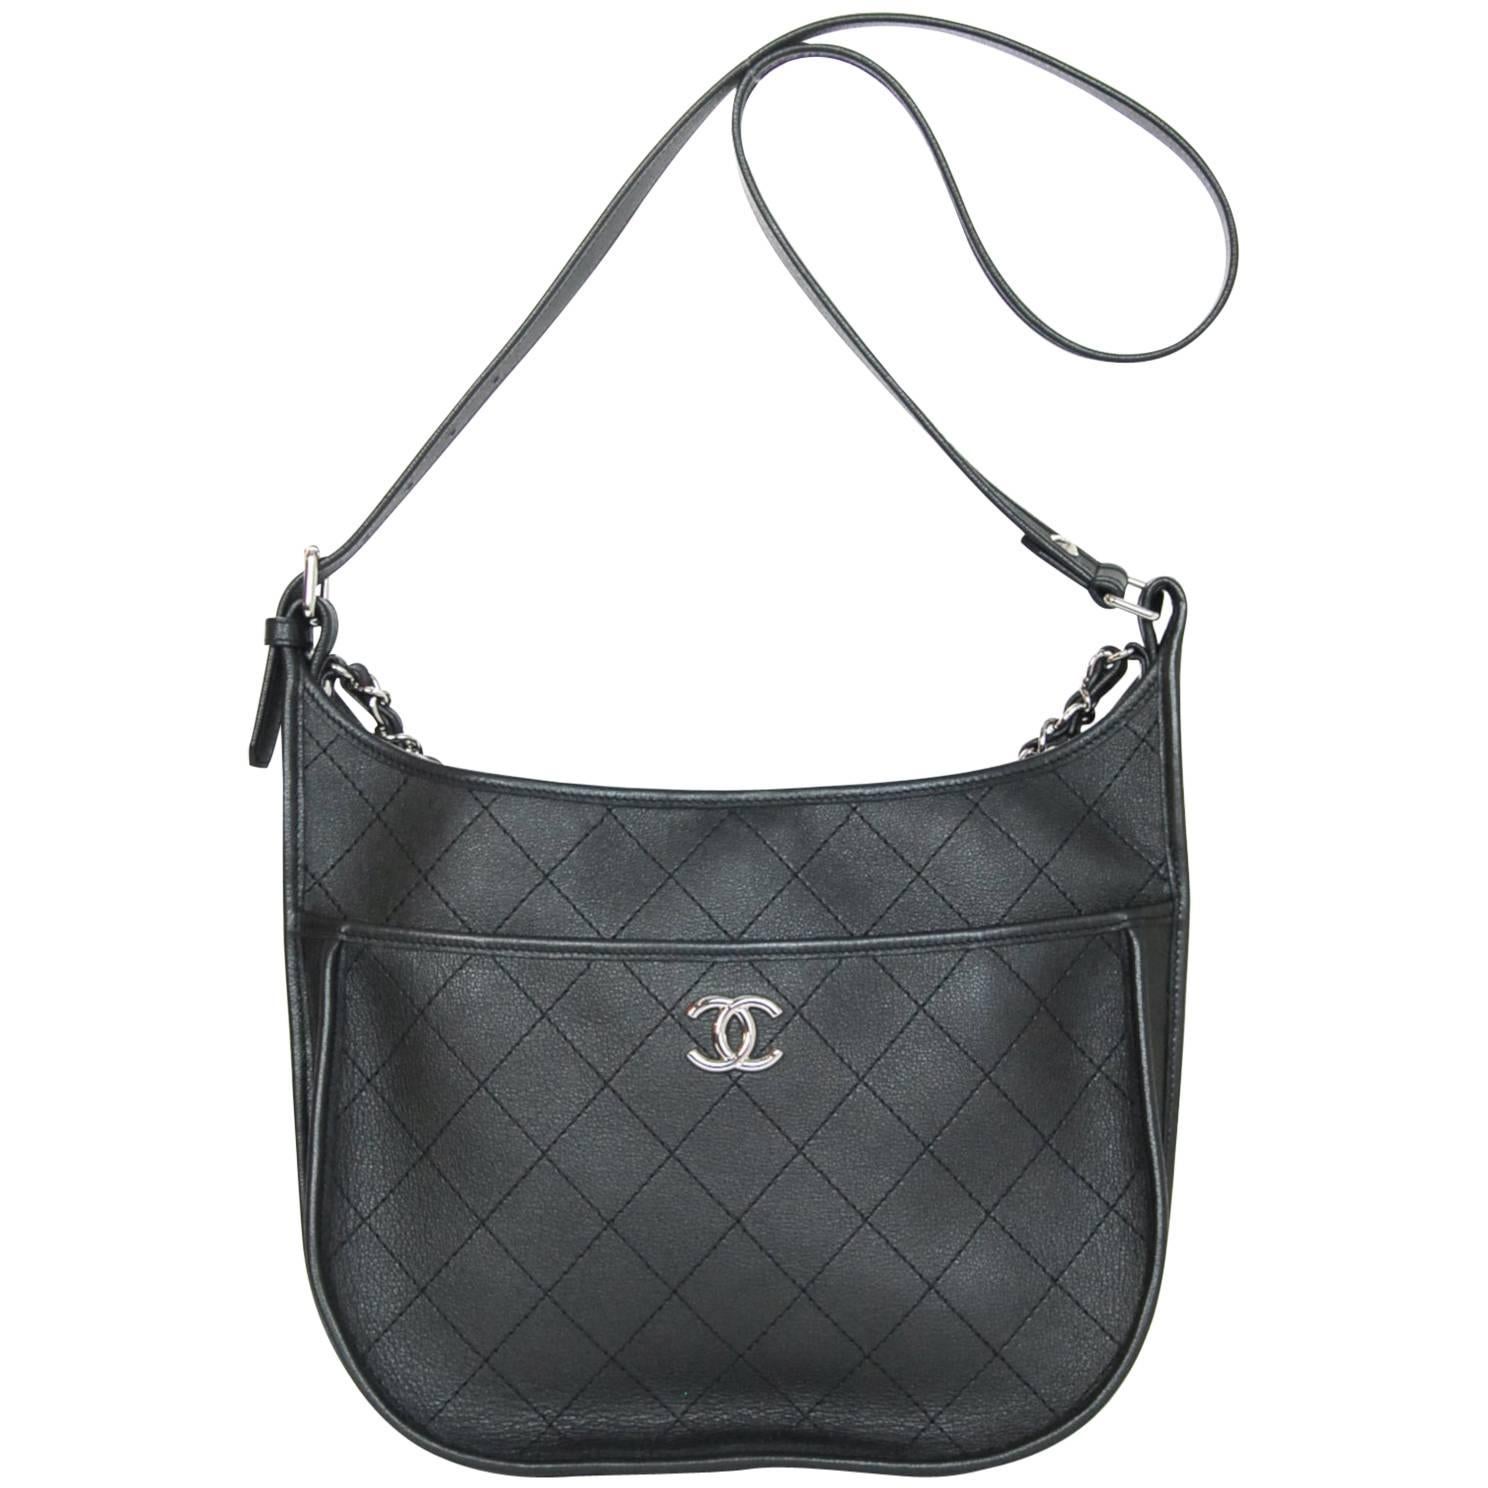 Chanel 2018 Black Metallic Quilted Leather Hobo Messenger Bag w. Receipt rt. $4K